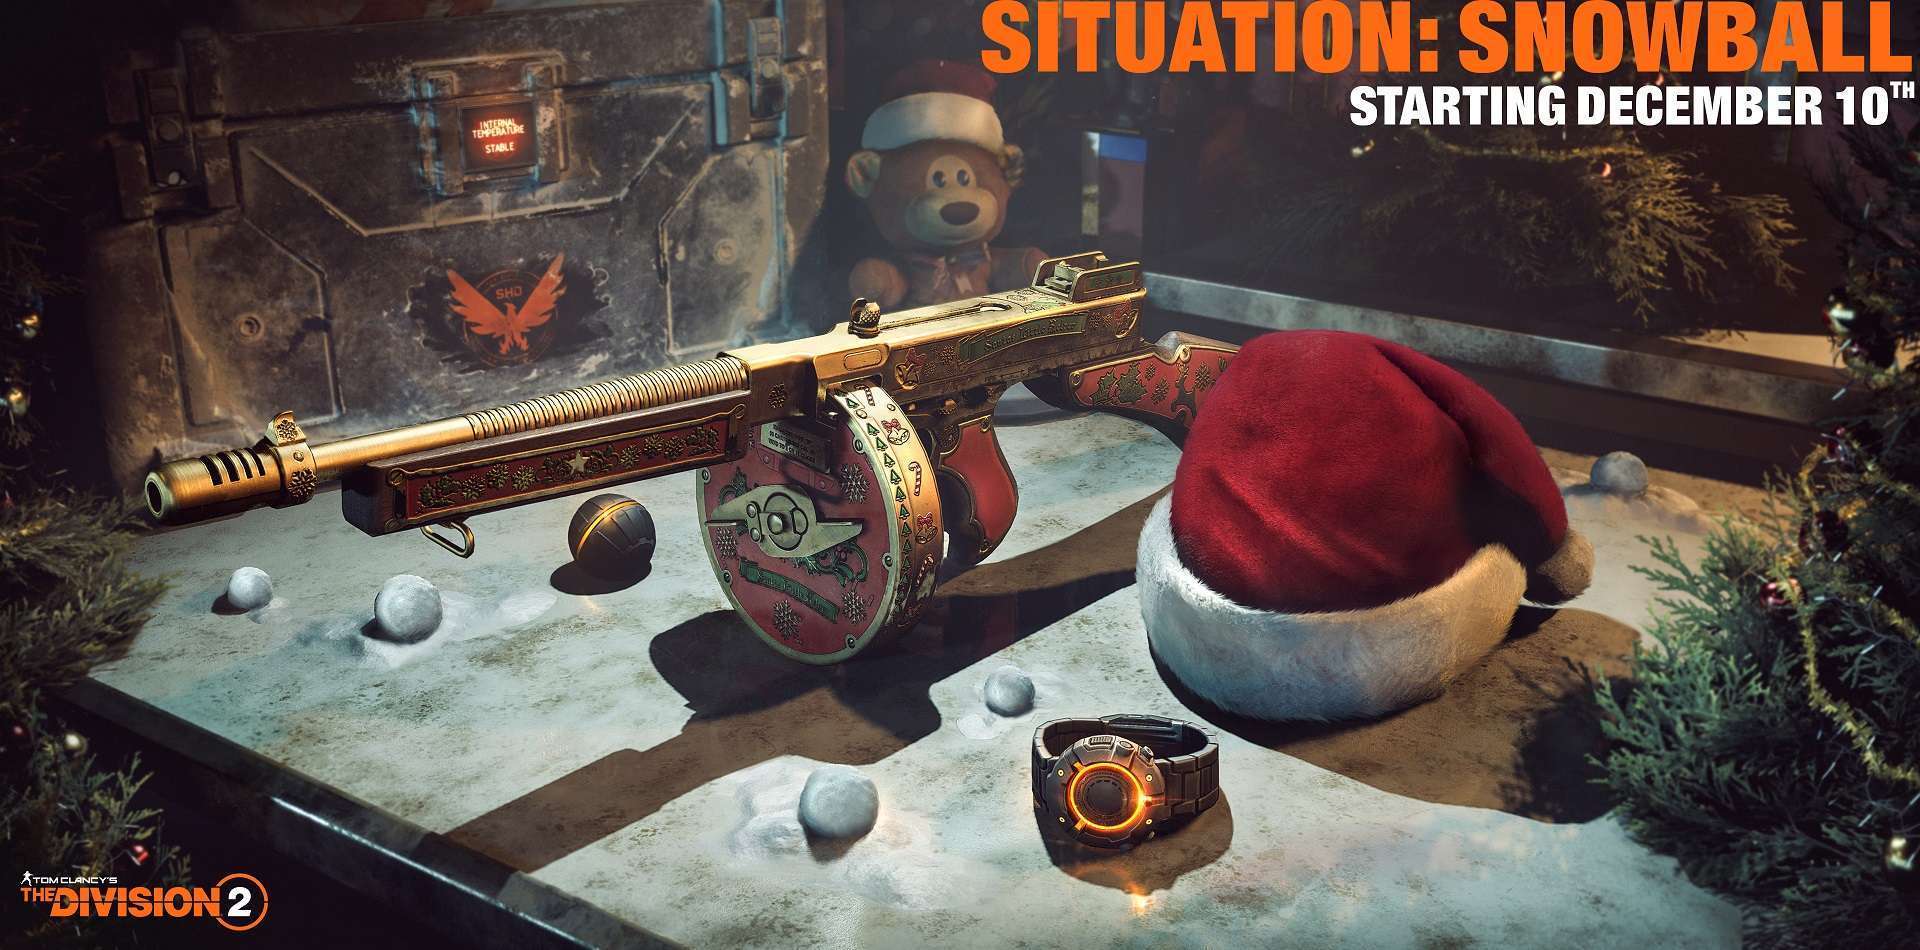 Tom Clancy’s The Division 2 Latest Update Including in-Game Holiday Event SITUATION: SNOWBALL Now Out